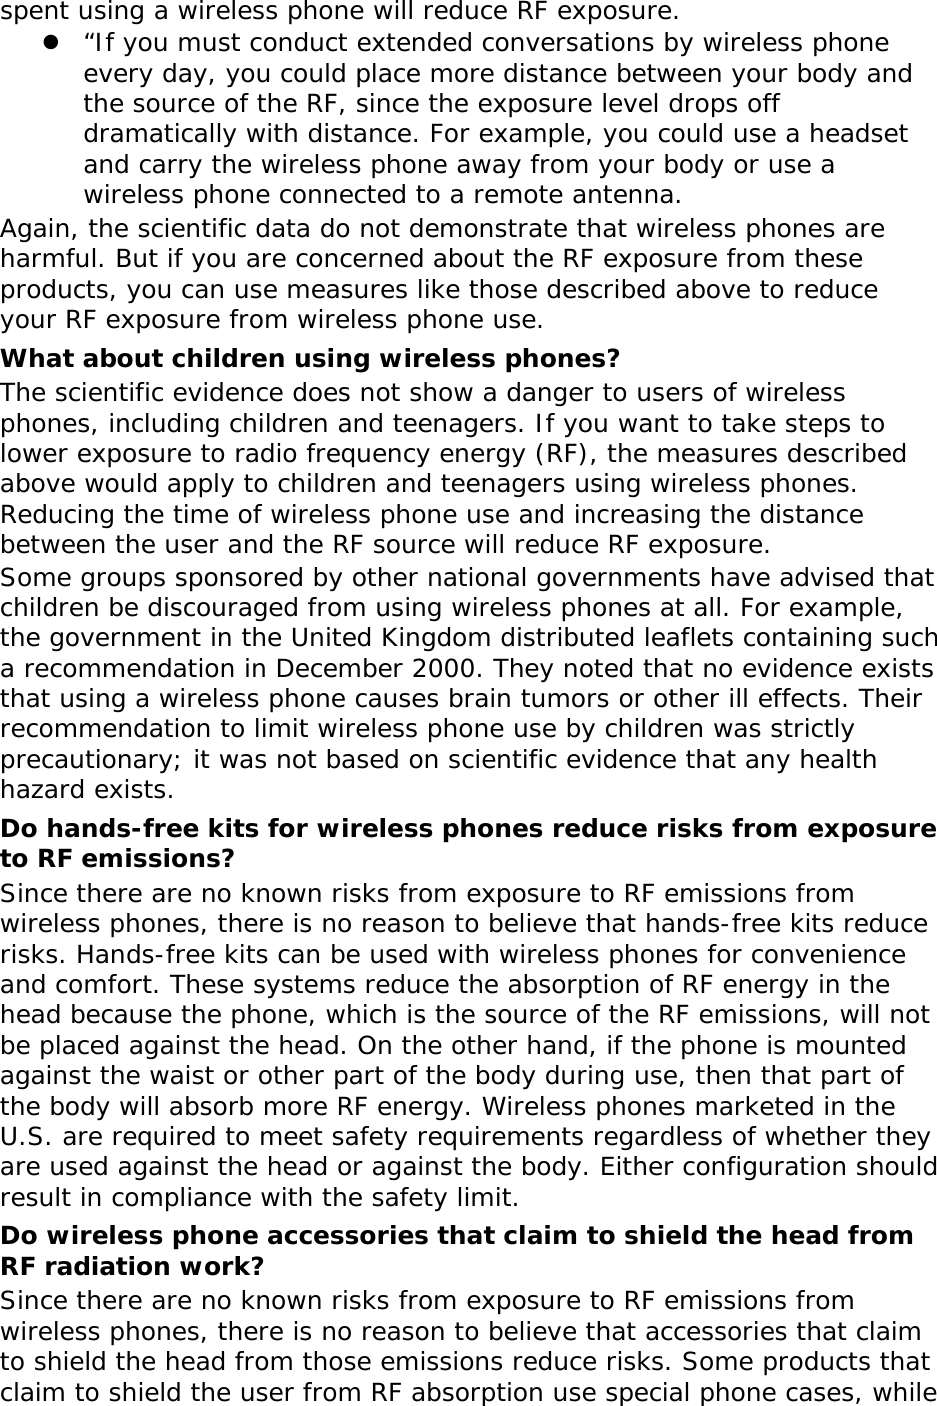 spent using a wireless phone will reduce RF exposure. z “If you must conduct extended conversations by wireless phone every day, you could place more distance between your body and the source of the RF, since the exposure level drops off dramatically with distance. For example, you could use a headset and carry the wireless phone away from your body or use a wireless phone connected to a remote antenna. Again, the scientific data do not demonstrate that wireless phones are harmful. But if you are concerned about the RF exposure from these products, you can use measures like those described above to reduce your RF exposure from wireless phone use. What about children using wireless phones? The scientific evidence does not show a danger to users of wireless phones, including children and teenagers. If you want to take steps to lower exposure to radio frequency energy (RF), the measures described above would apply to children and teenagers using wireless phones. Reducing the time of wireless phone use and increasing the distance between the user and the RF source will reduce RF exposure. Some groups sponsored by other national governments have advised that children be discouraged from using wireless phones at all. For example, the government in the United Kingdom distributed leaflets containing such a recommendation in December 2000. They noted that no evidence exists that using a wireless phone causes brain tumors or other ill effects. Their recommendation to limit wireless phone use by children was strictly precautionary; it was not based on scientific evidence that any health hazard exists.  Do hands-free kits for wireless phones reduce risks from exposure to RF emissions? Since there are no known risks from exposure to RF emissions from wireless phones, there is no reason to believe that hands-free kits reduce risks. Hands-free kits can be used with wireless phones for convenience and comfort. These systems reduce the absorption of RF energy in the head because the phone, which is the source of the RF emissions, will not be placed against the head. On the other hand, if the phone is mounted against the waist or other part of the body during use, then that part of the body will absorb more RF energy. Wireless phones marketed in the U.S. are required to meet safety requirements regardless of whether they are used against the head or against the body. Either configuration should result in compliance with the safety limit. Do wireless phone accessories that claim to shield the head from RF radiation work? Since there are no known risks from exposure to RF emissions from wireless phones, there is no reason to believe that accessories that claim to shield the head from those emissions reduce risks. Some products that claim to shield the user from RF absorption use special phone cases, while 